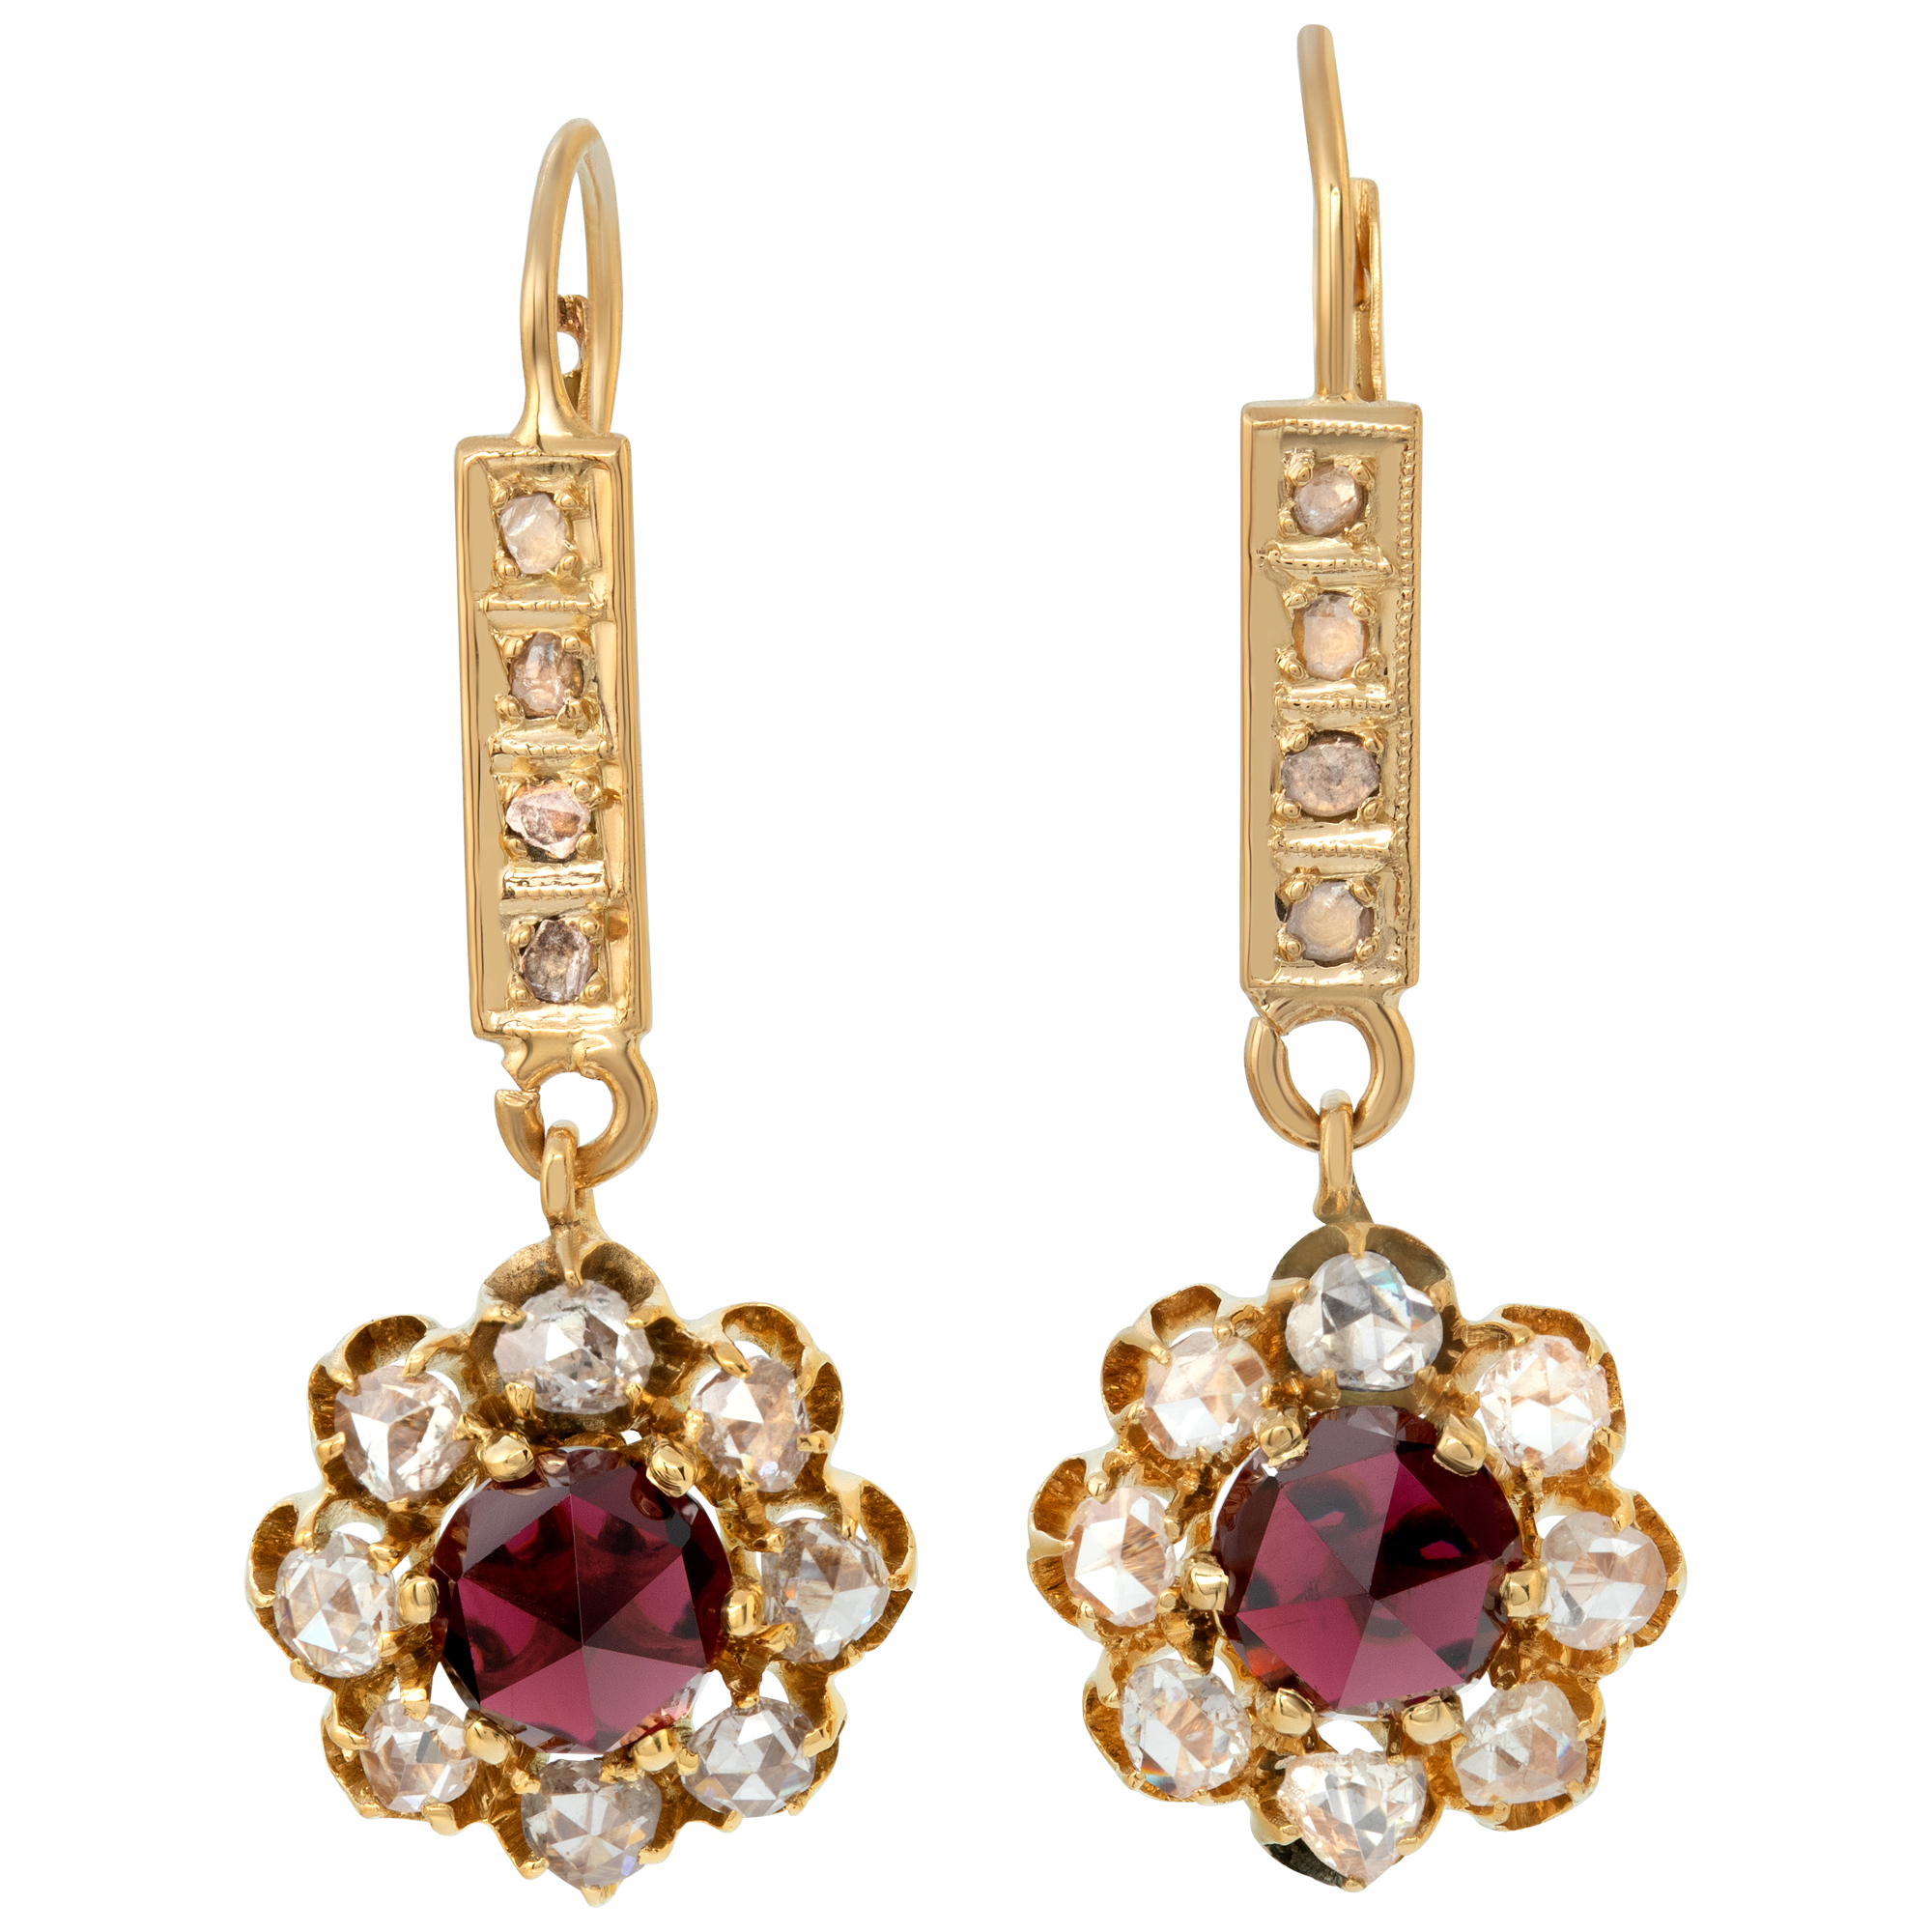 Pretty 14k yellow gold floral briolette rose cut diamond earrings with approximately 2 carats image 1